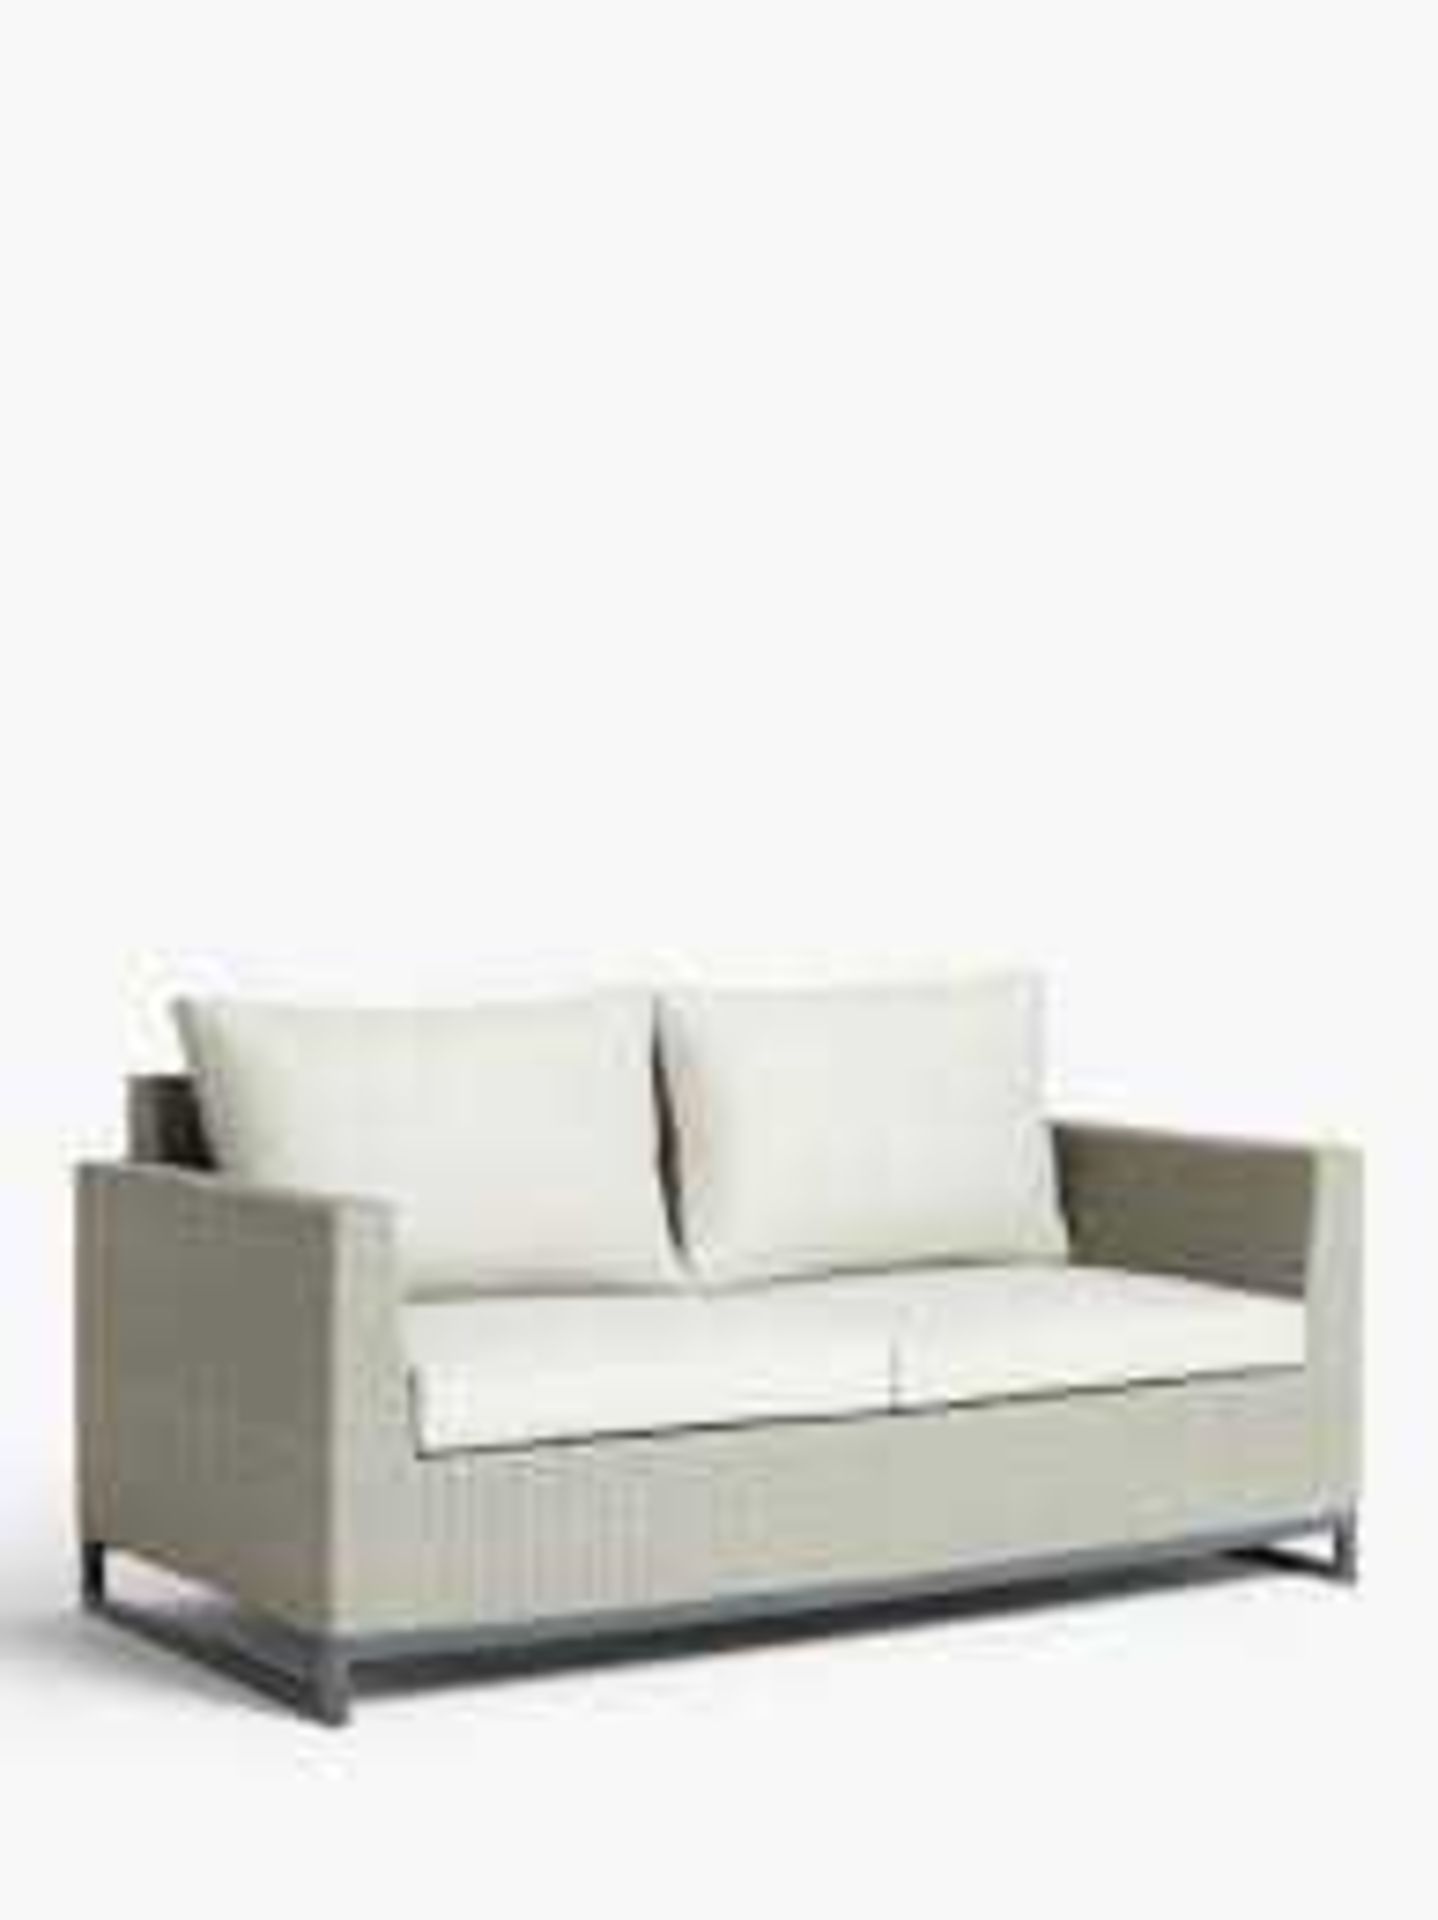 RRP £700 To Contain Unboxed 2Seater Rattan Garden Couch And 2 Rattan 1 Seater Chairs And Rattan Styl - Image 3 of 3